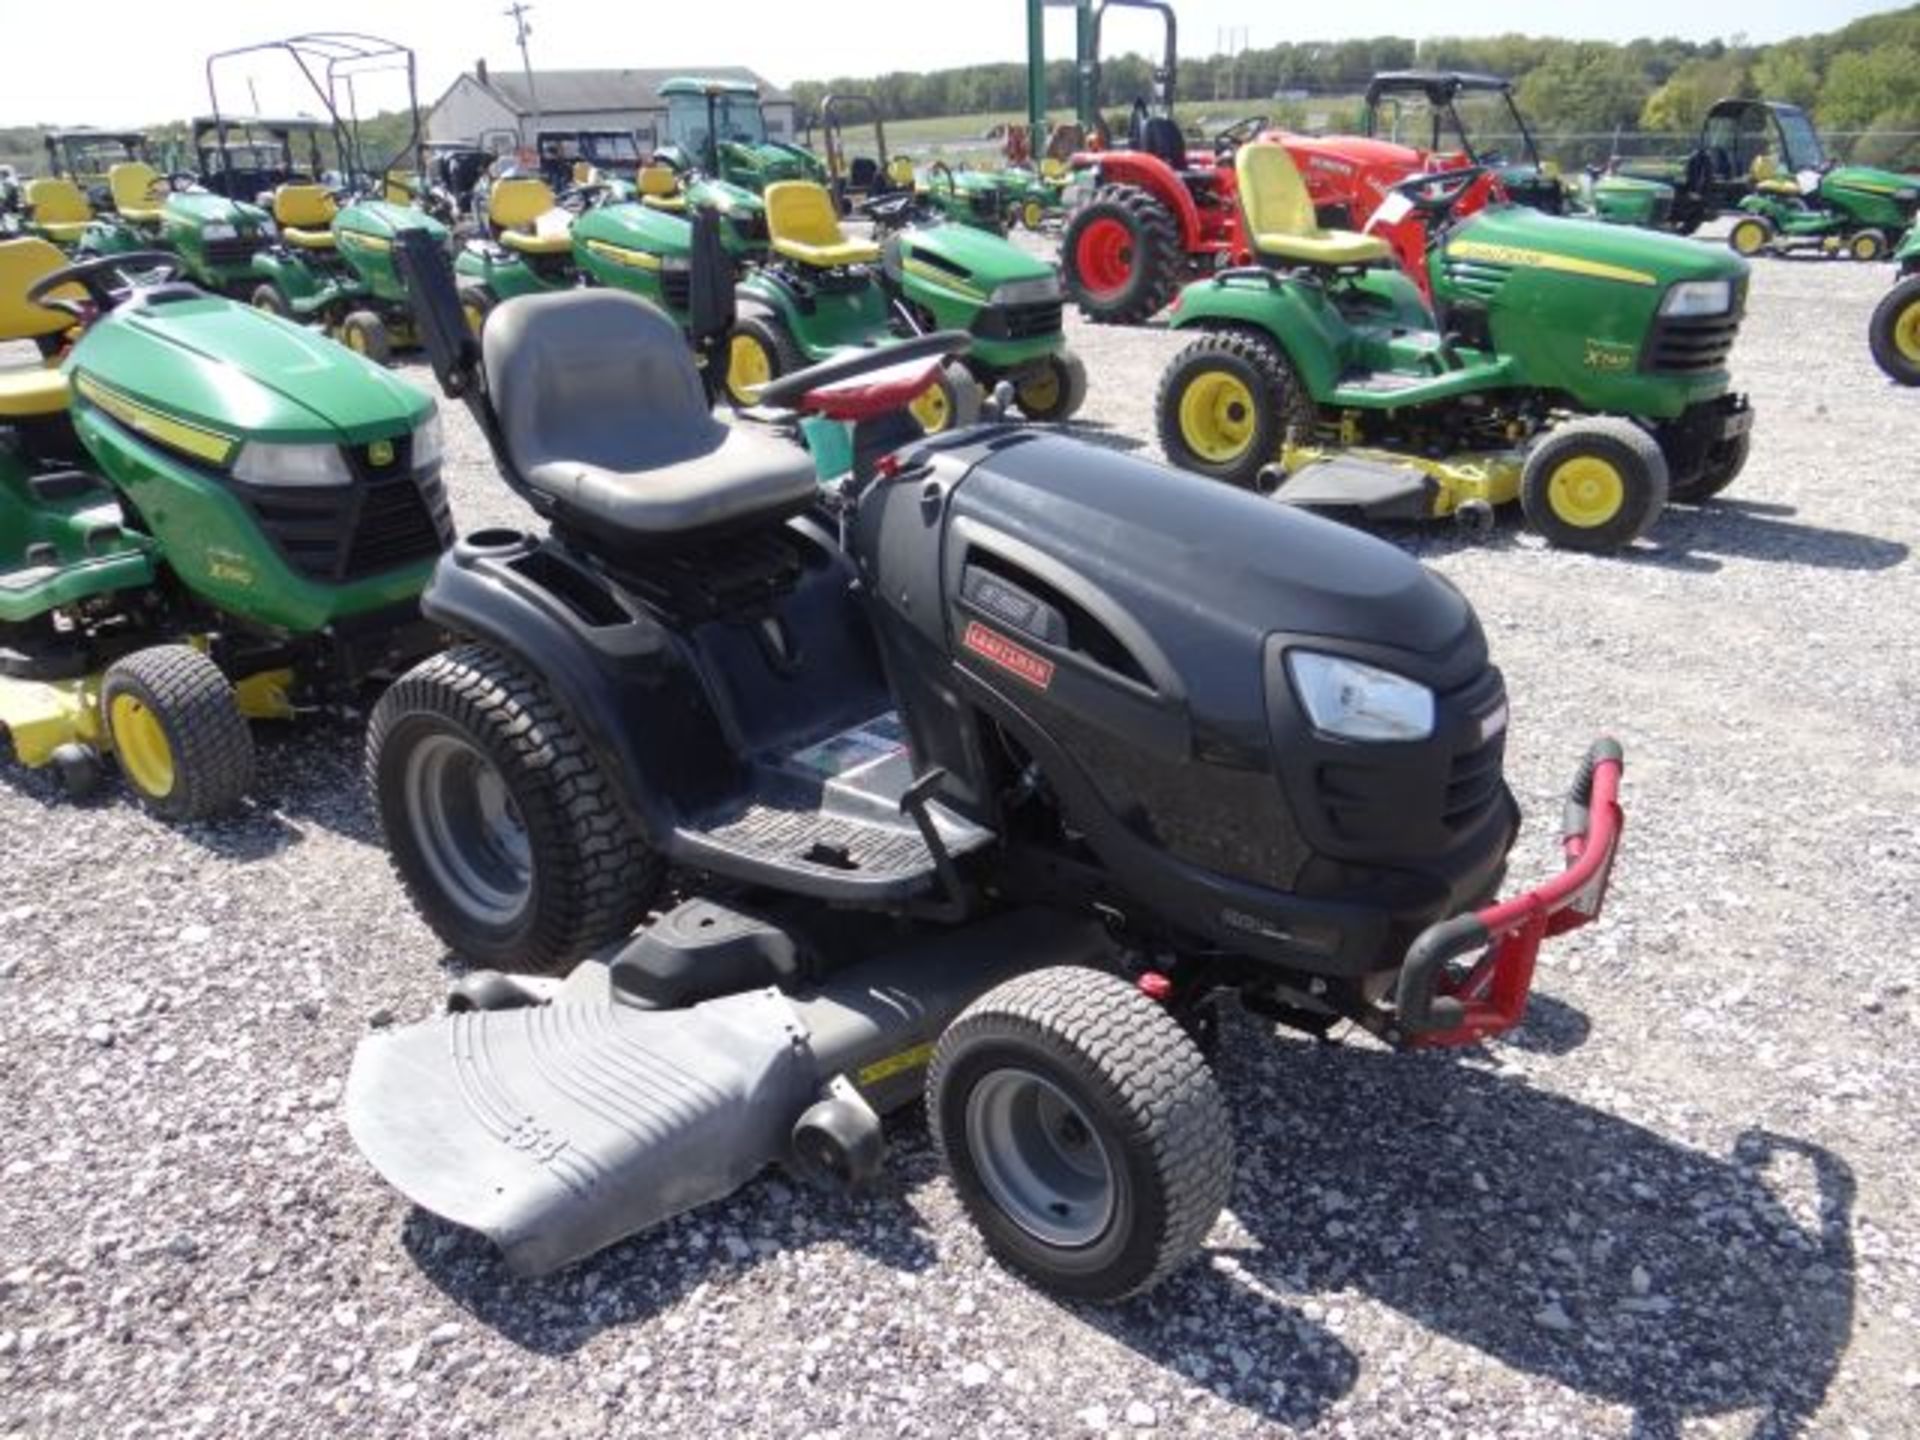 Craftsman GT6000 Mower 357 Hrs, 26 HP Kolher, Air Cooled, Hydro, 54" - Image 3 of 4